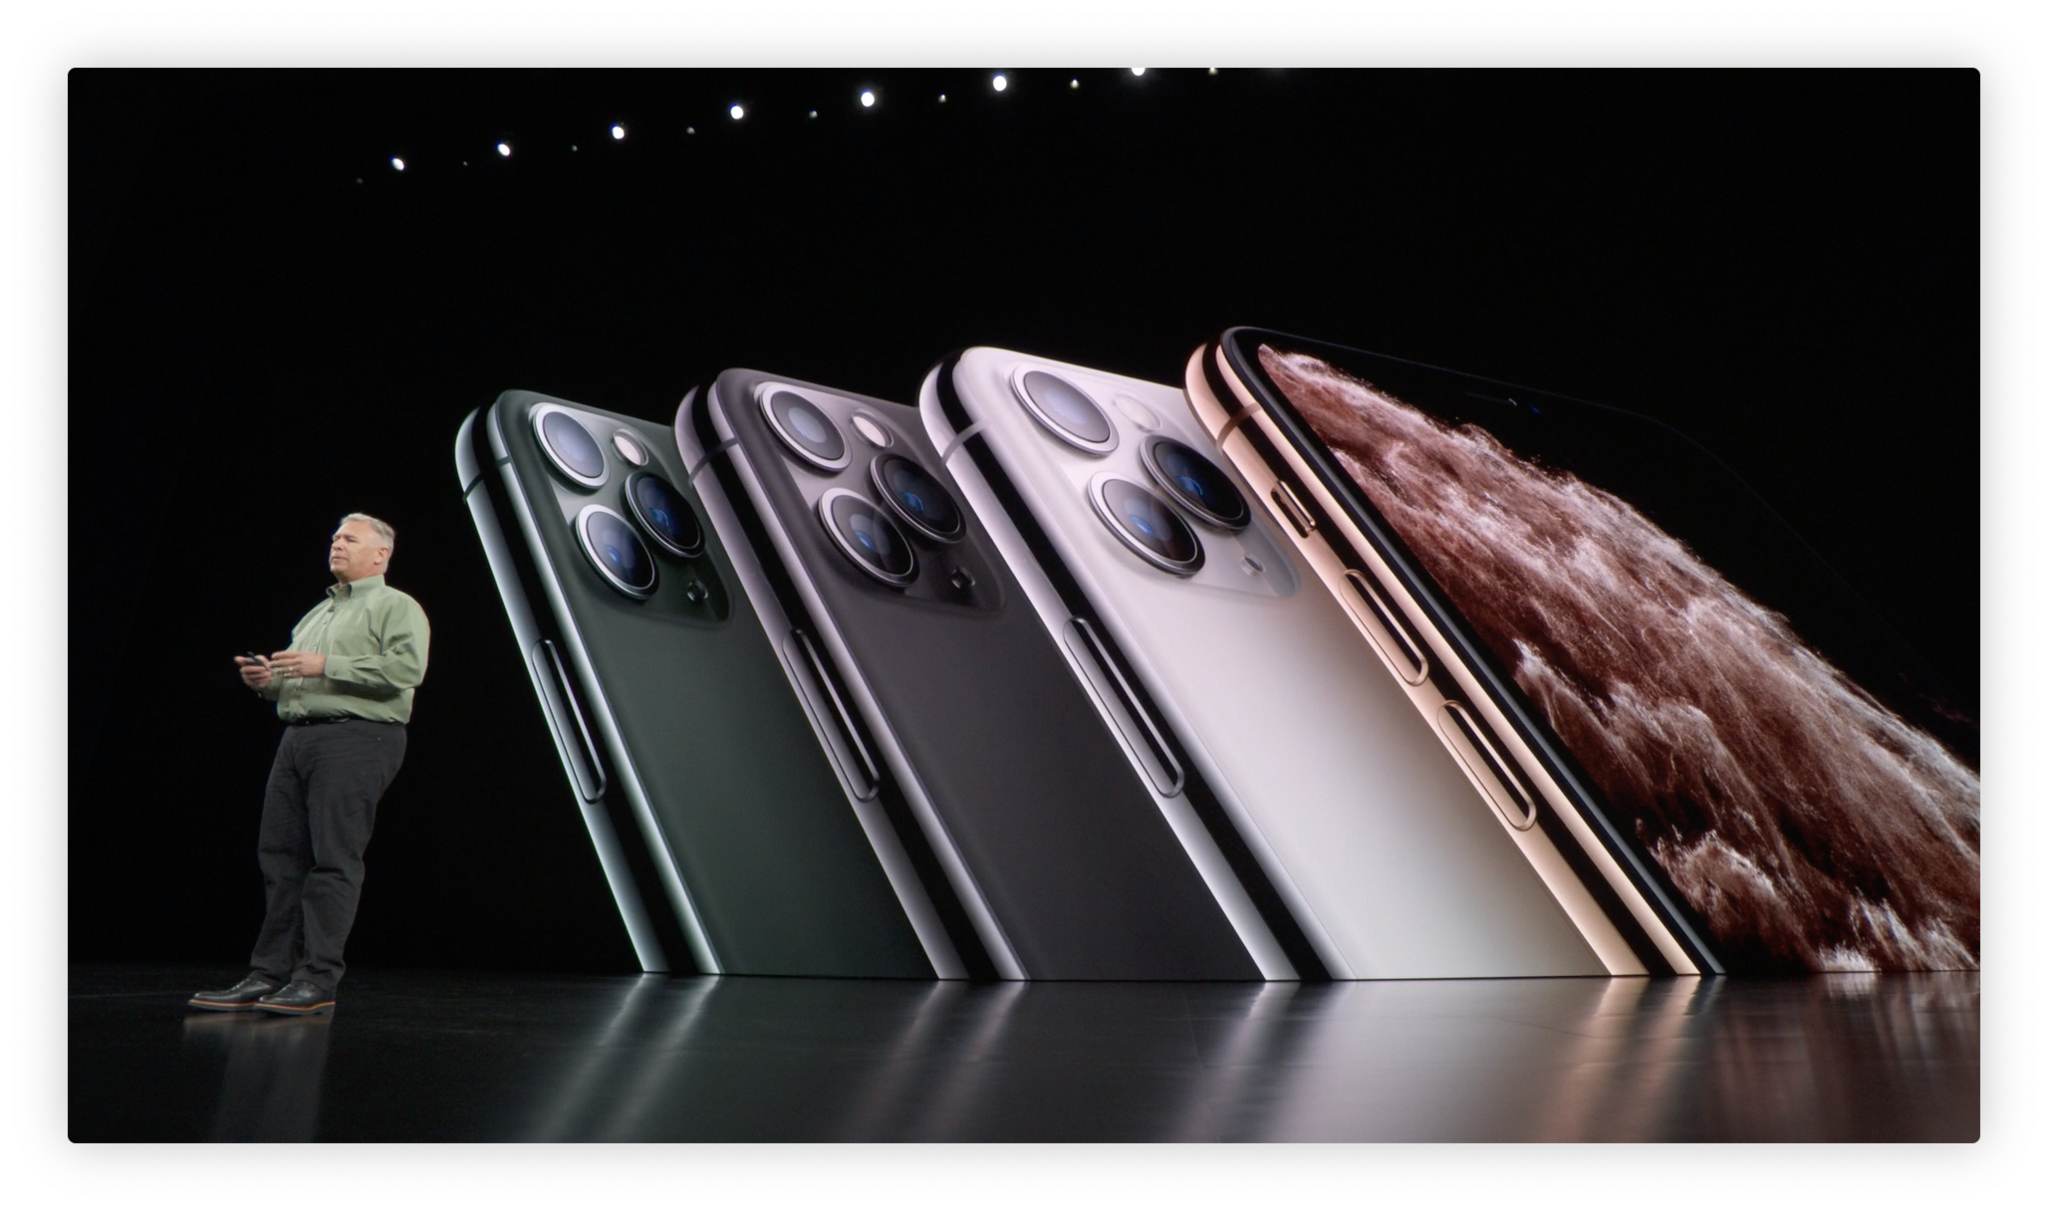 iPhone 11 Pro colors